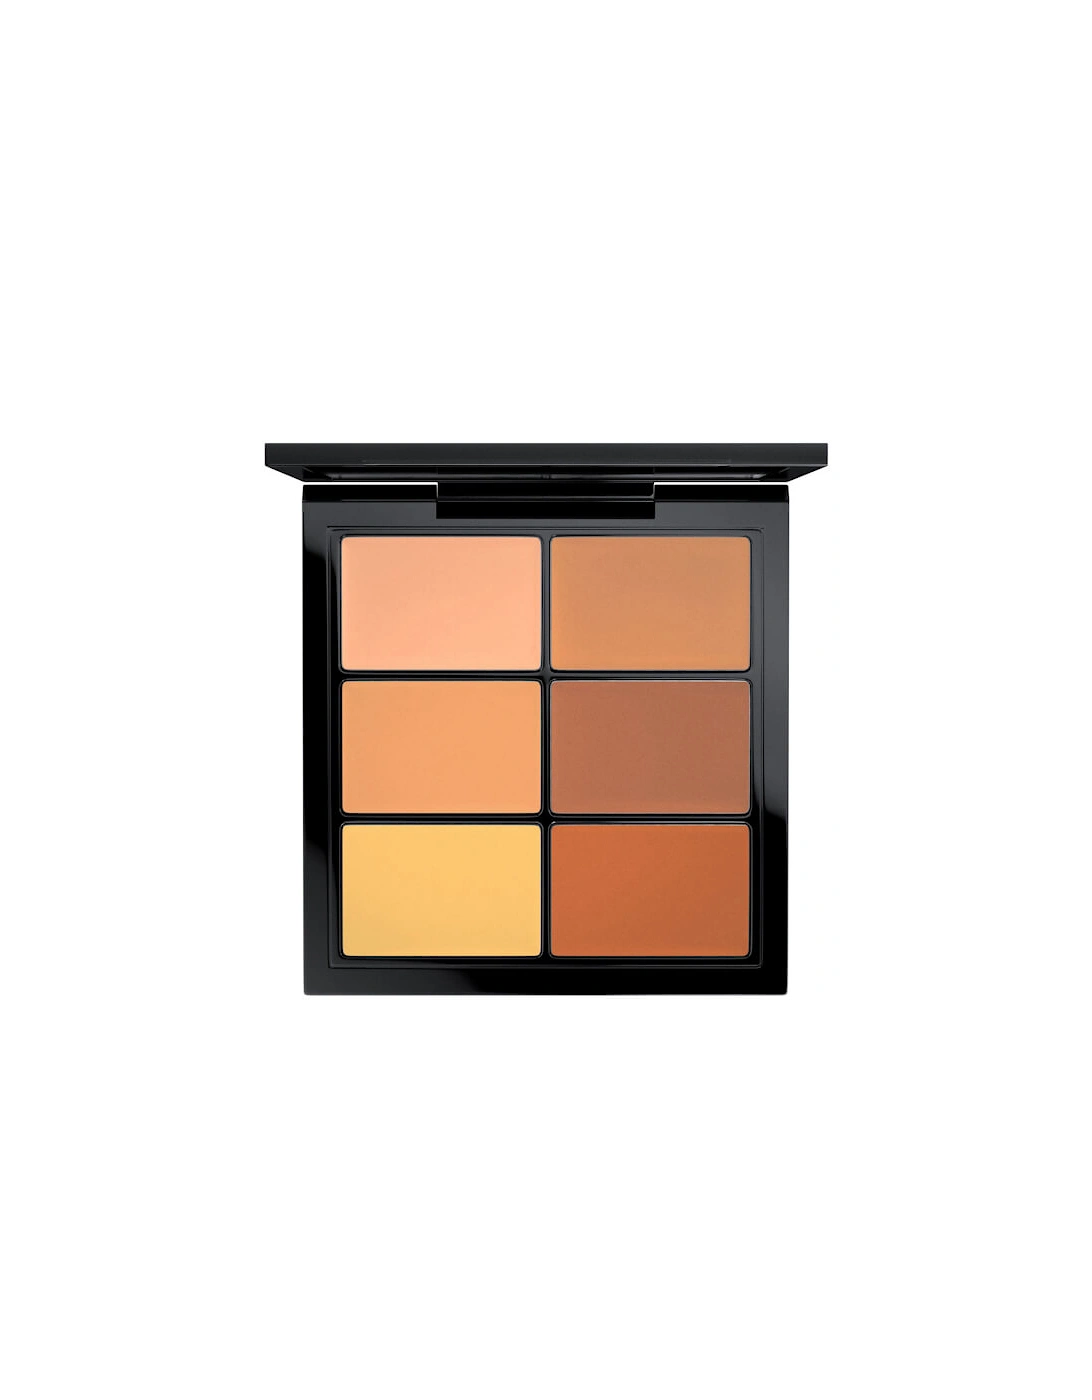 Studio Fix Conceal and Correct Palette - Medium Deep 6g, 2 of 1